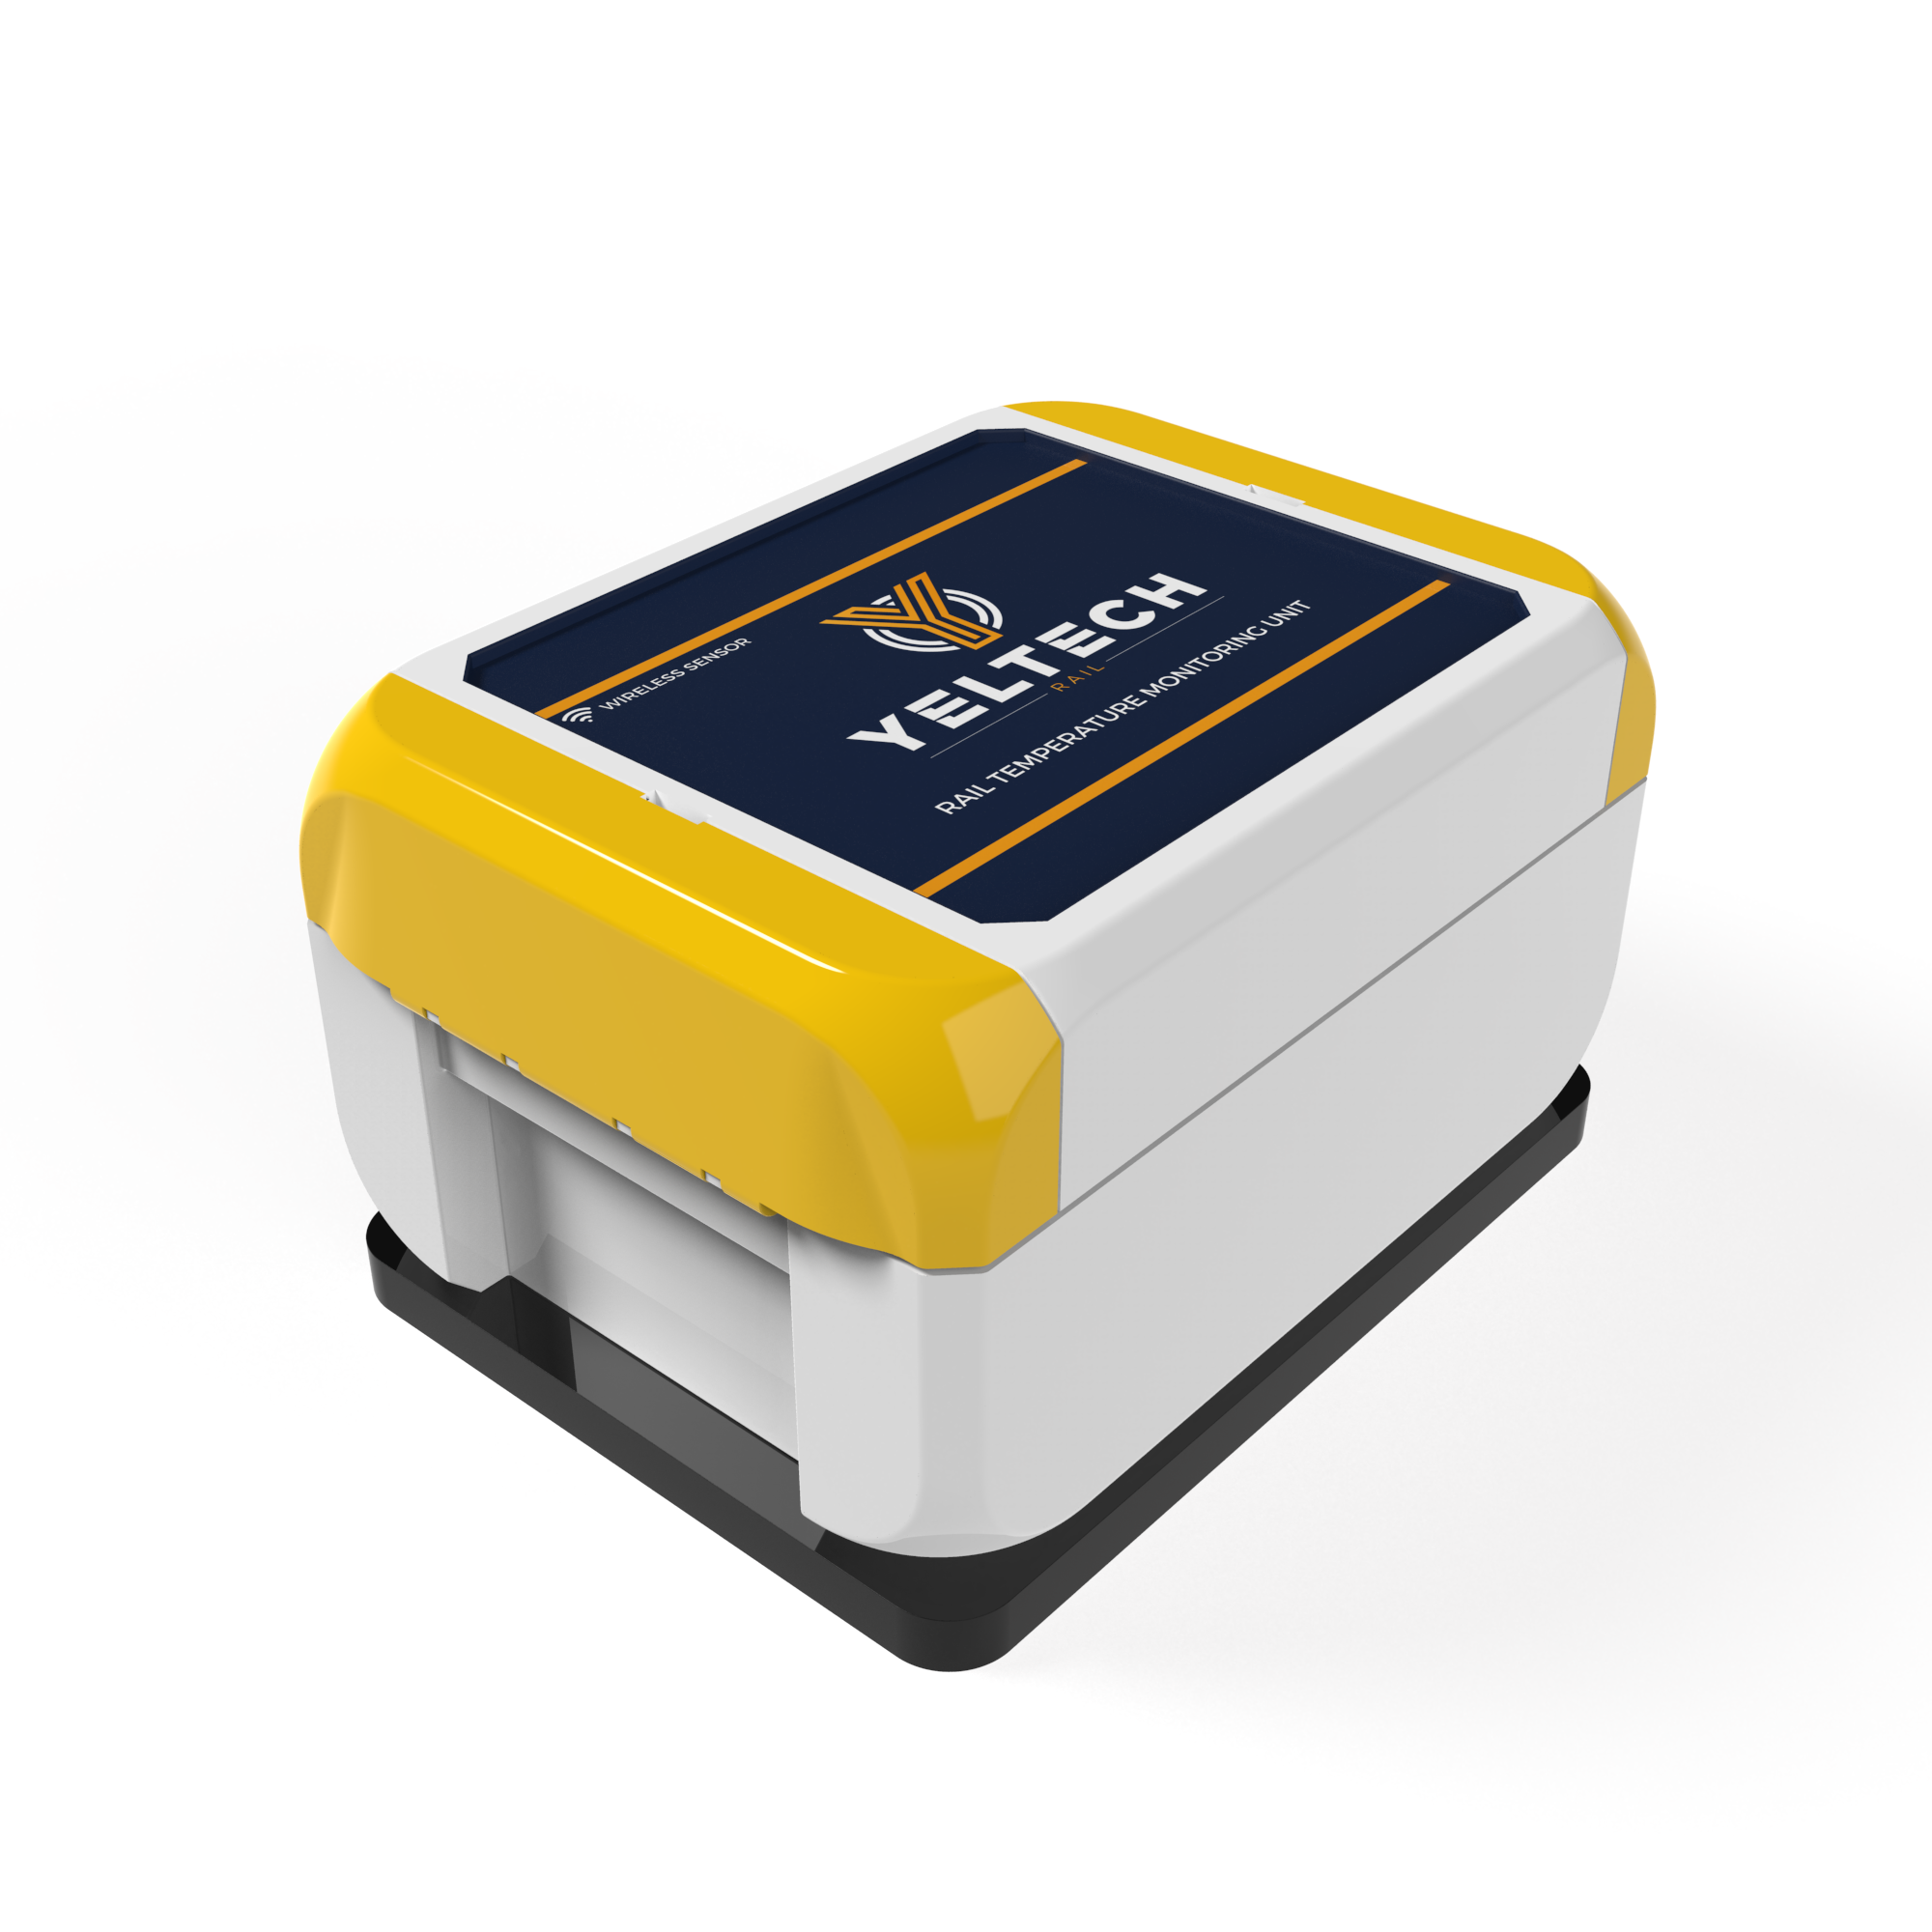 Yeltechs' intelligent and compact Rail Temperature Monitor